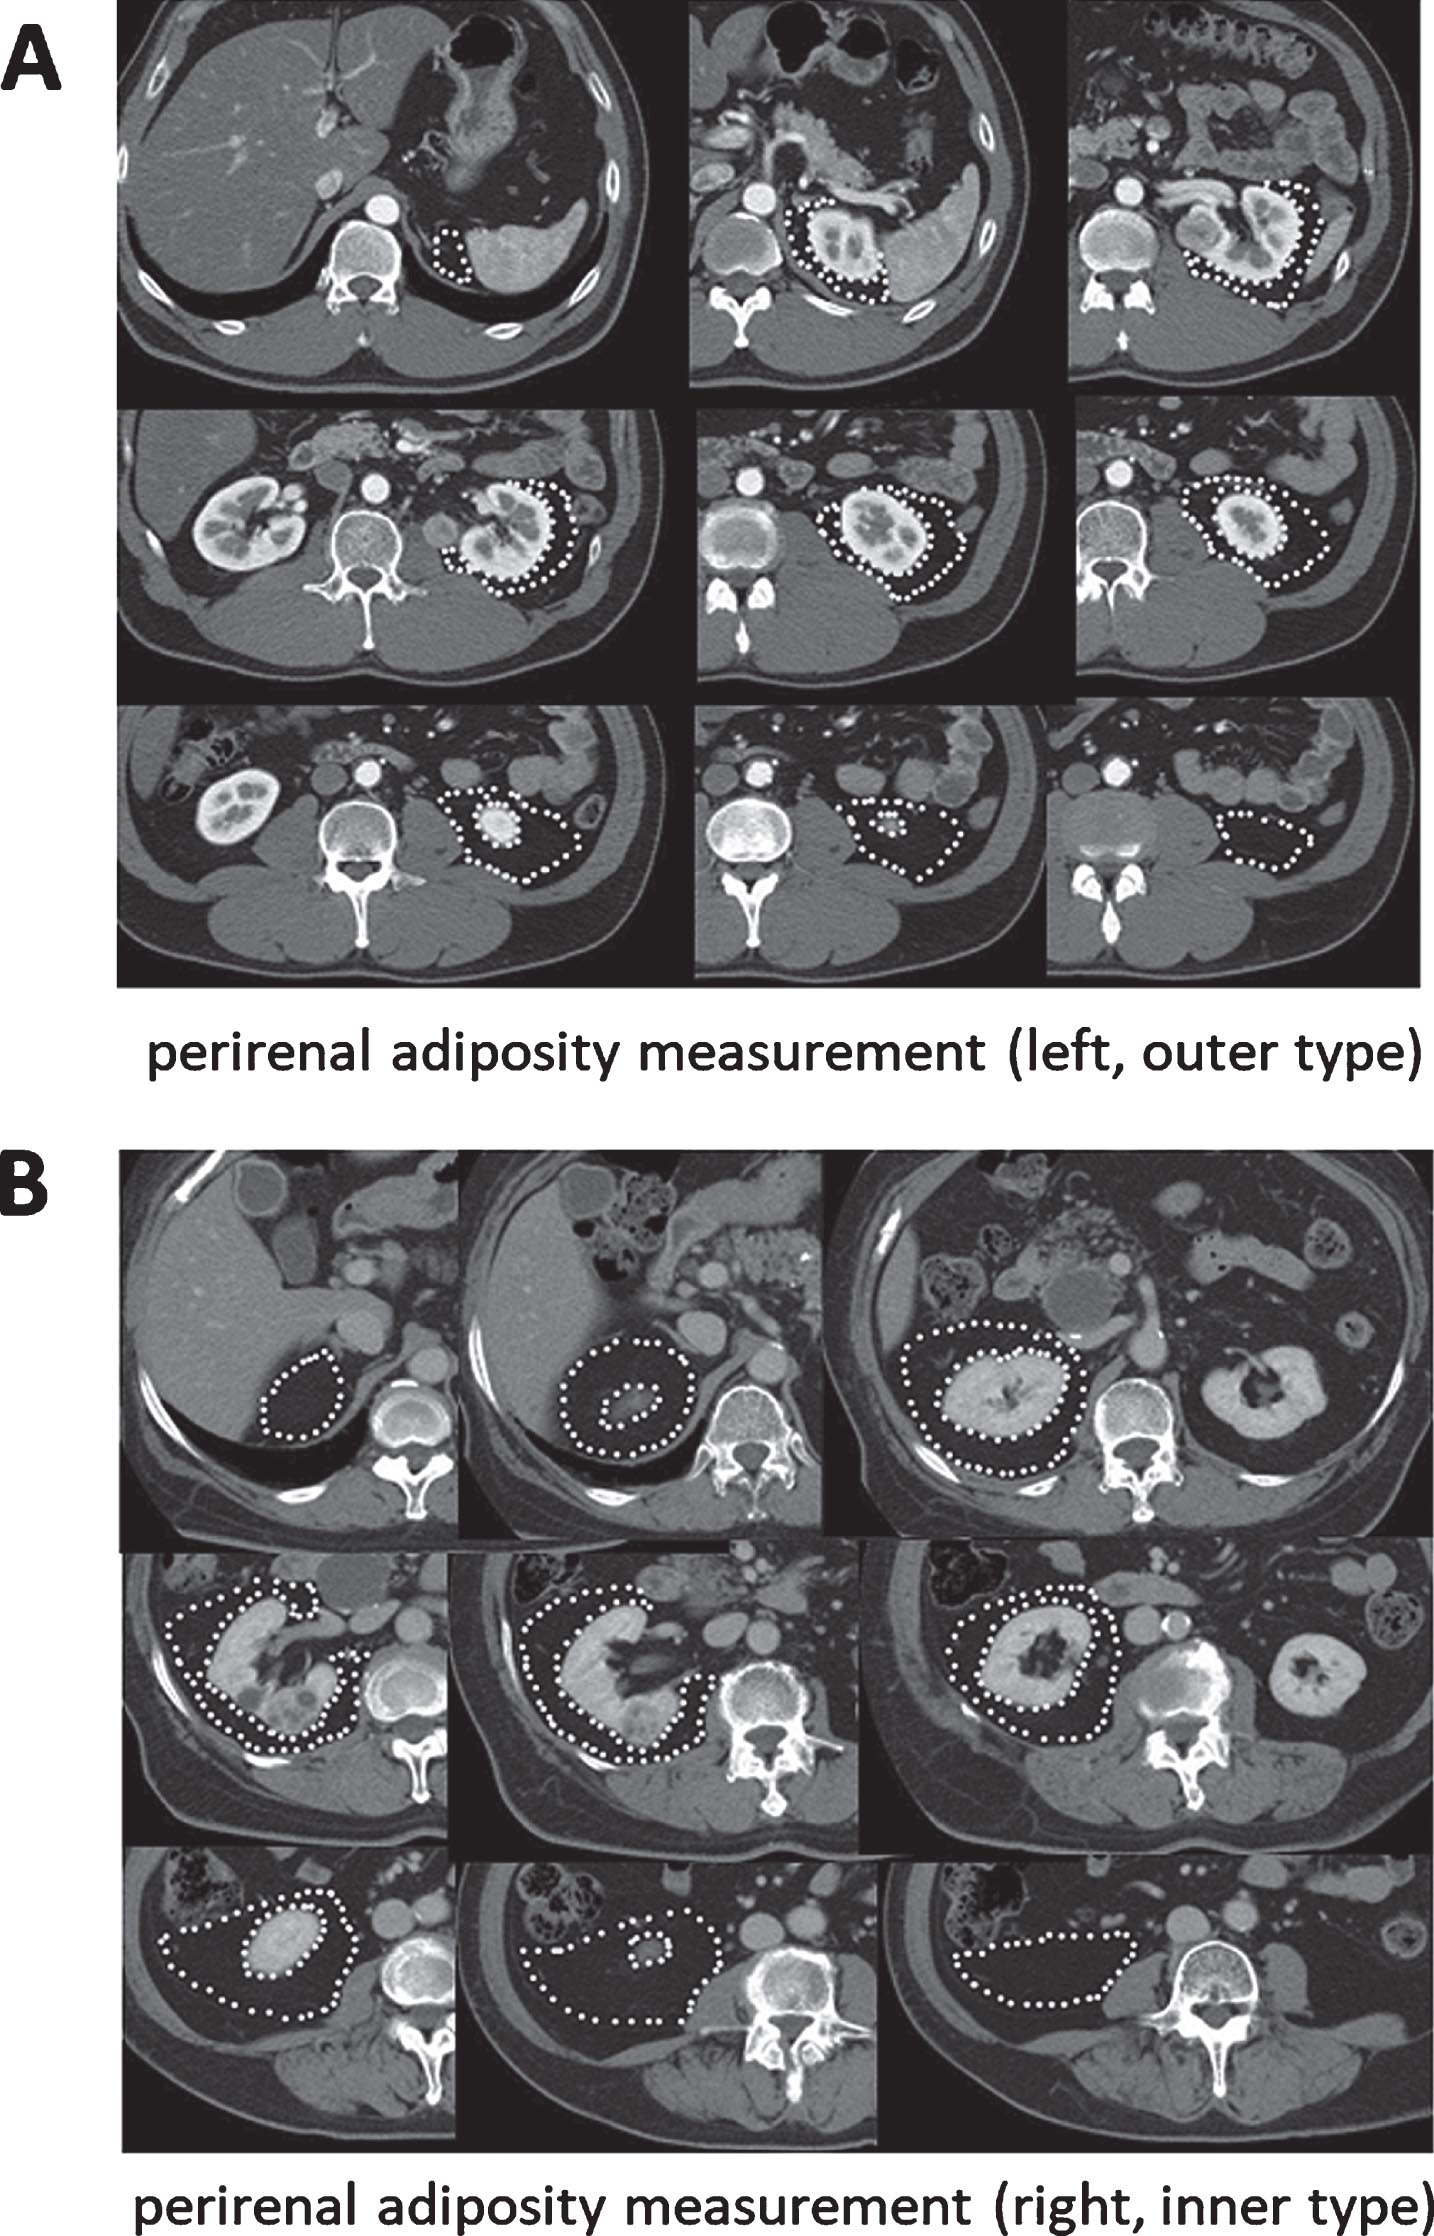 Measurement of fat area using 5 mm CT slices and SYNAPSE VINCENT® software. (A) Perirenal adiposity measurement (left side, RCC is outer type). (B) Perirenal adiposity measurement (right side, RCC is inner type).